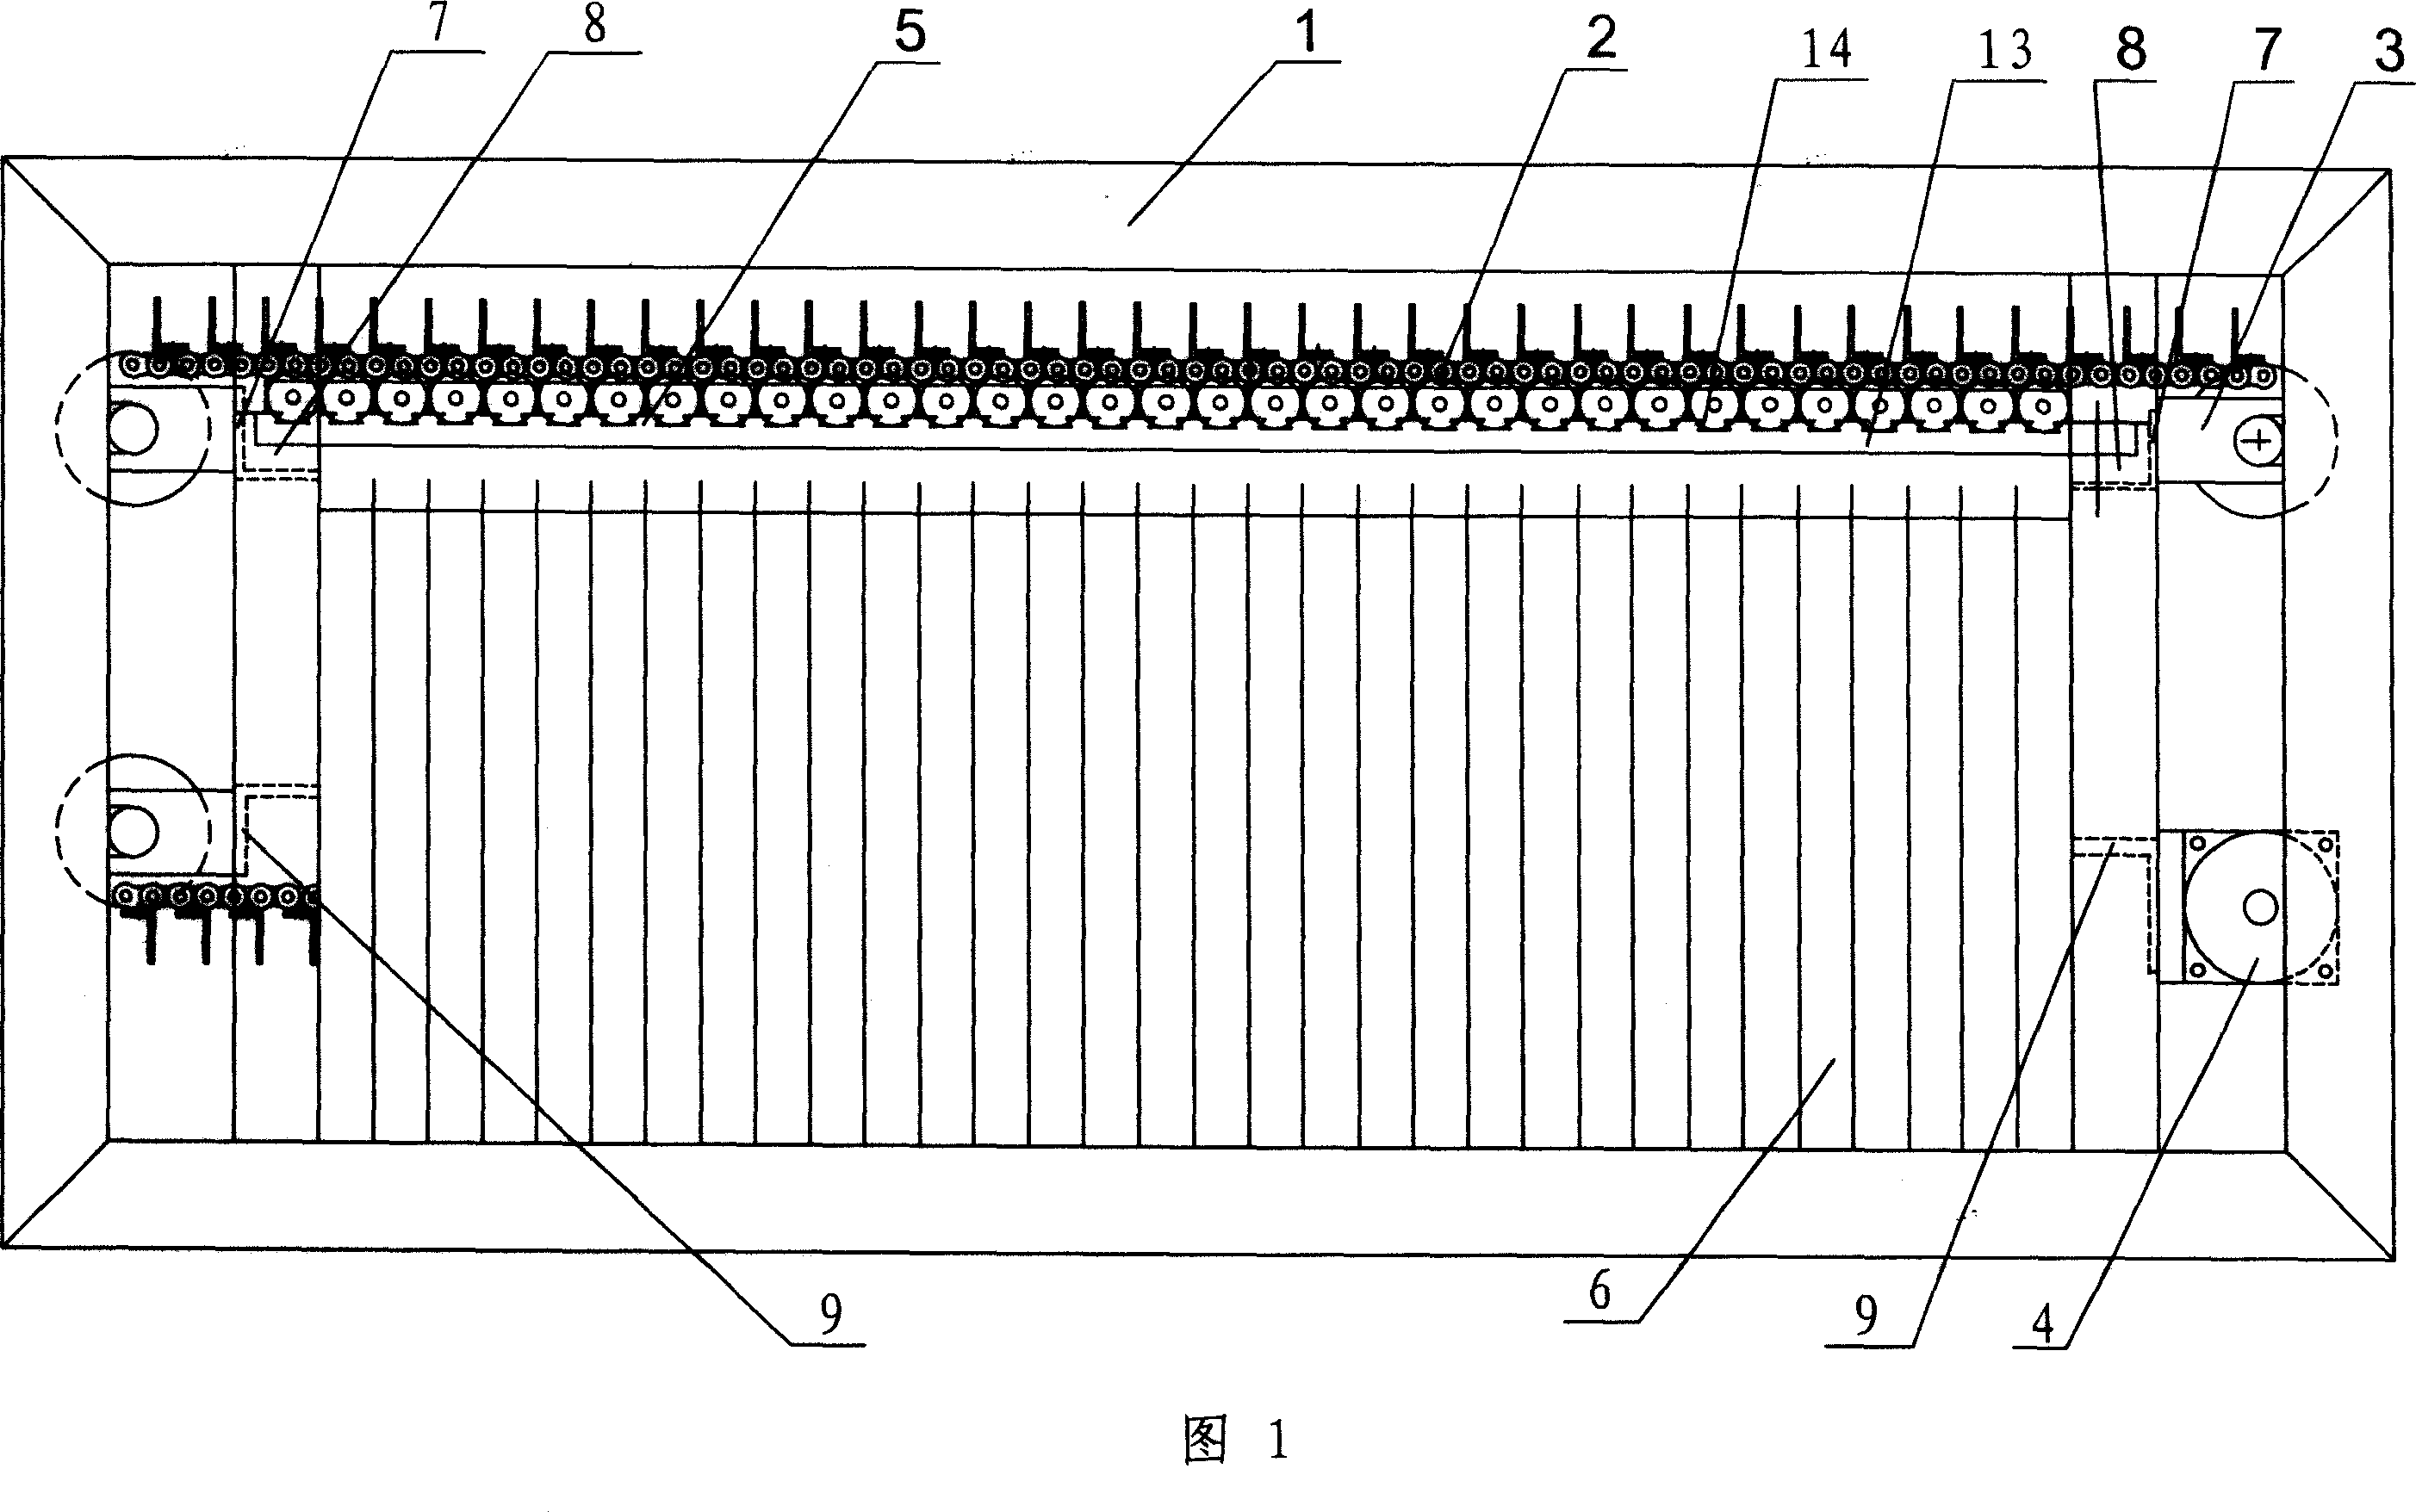 Bearing channel automatic sorting system